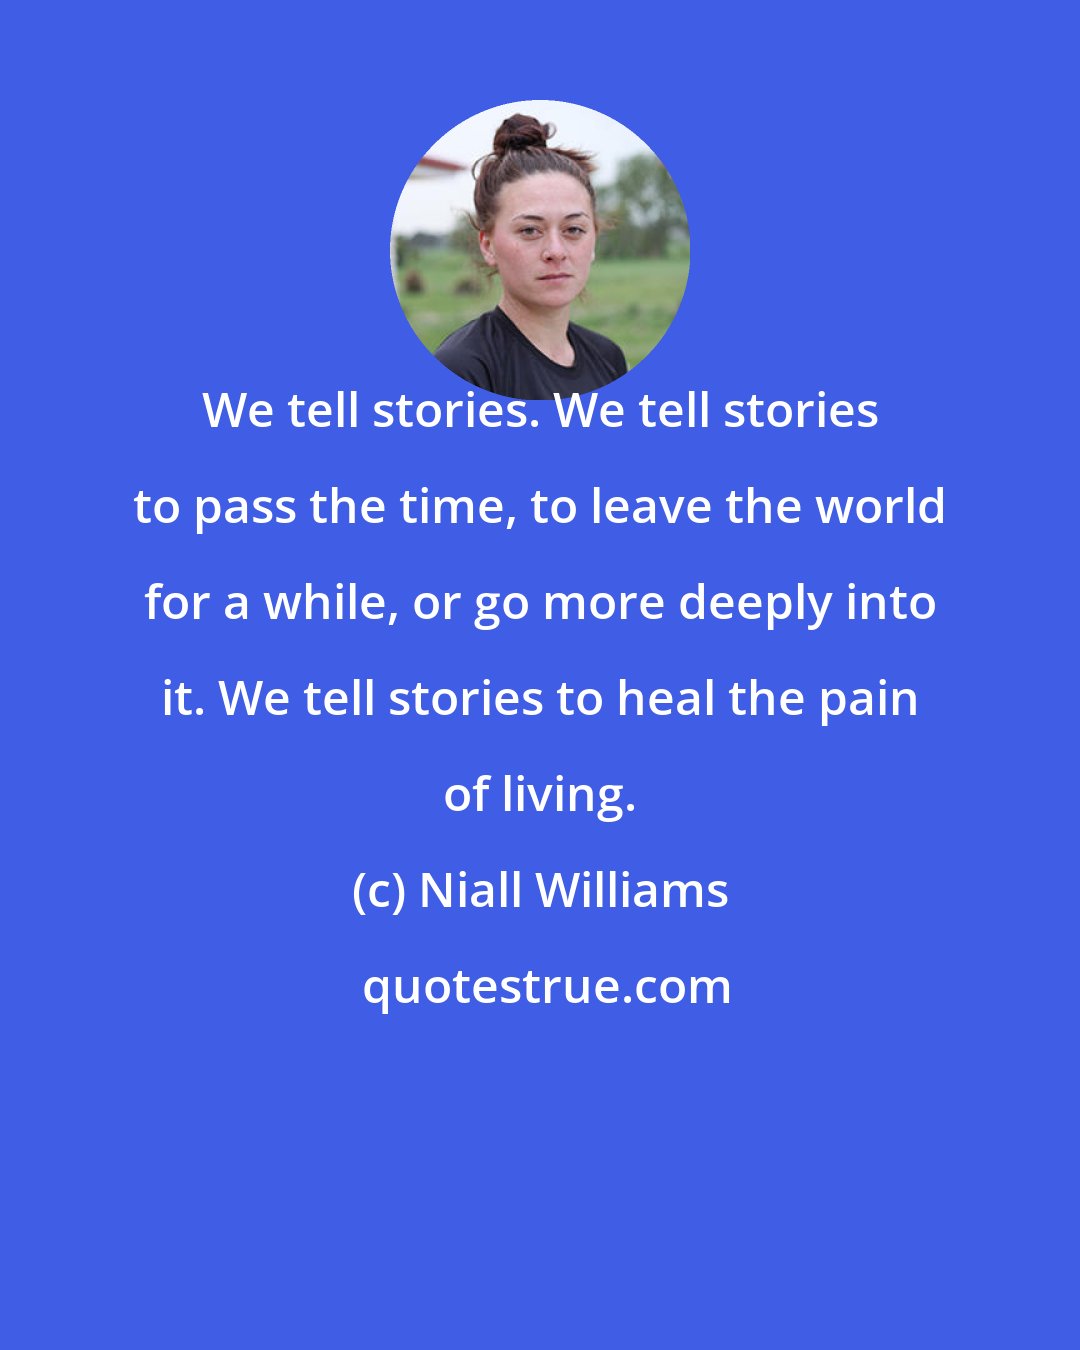 Niall Williams: We tell stories. We tell stories to pass the time, to leave the world for a while, or go more deeply into it. We tell stories to heal the pain of living.